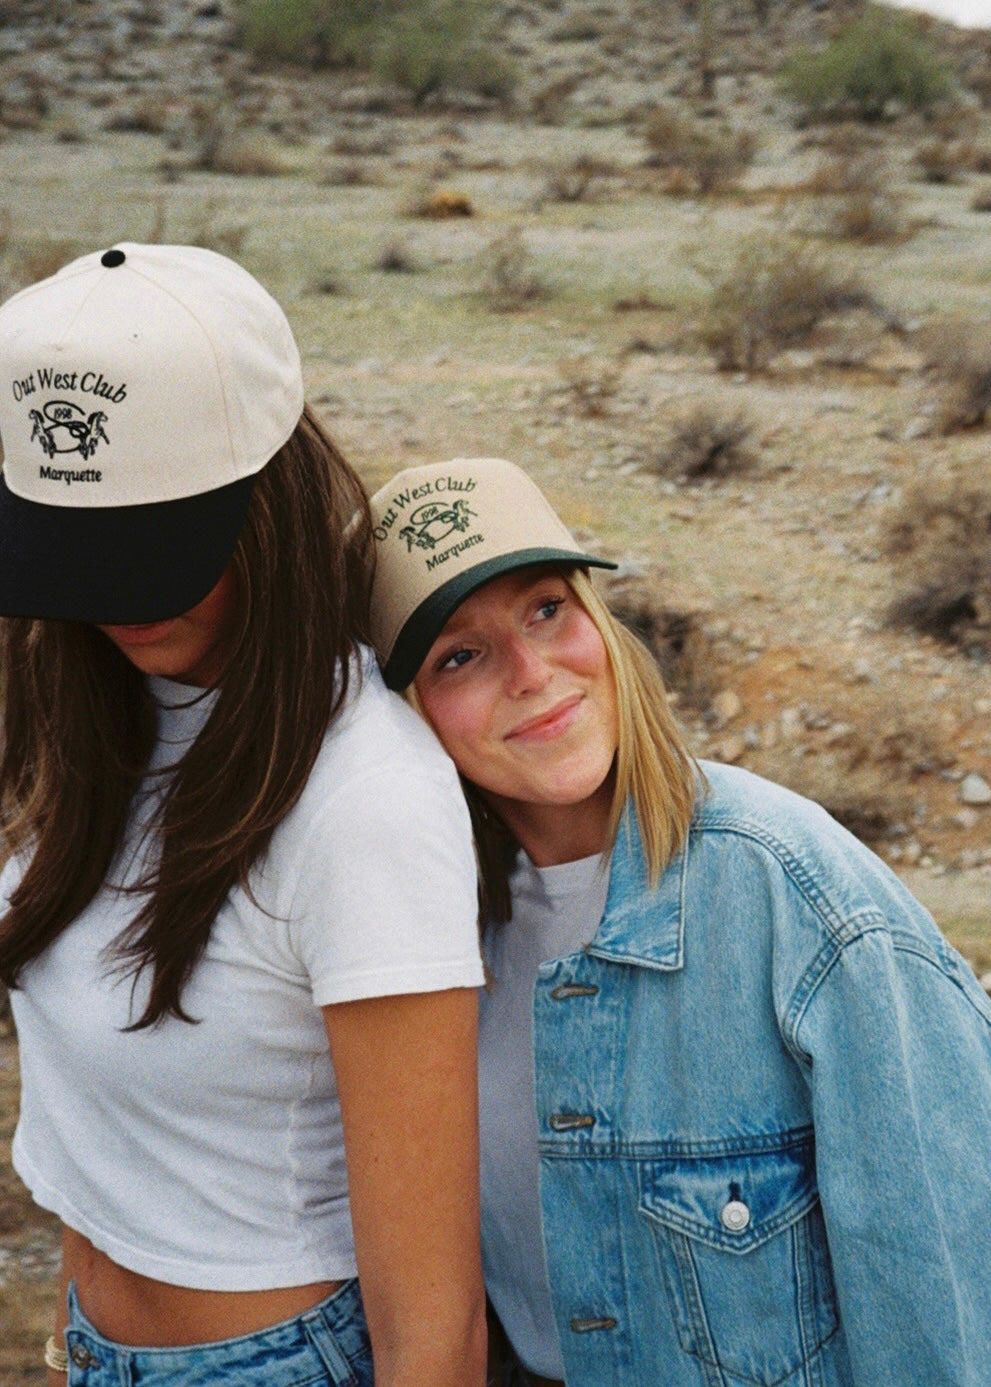 Out West Club Trucker Hat